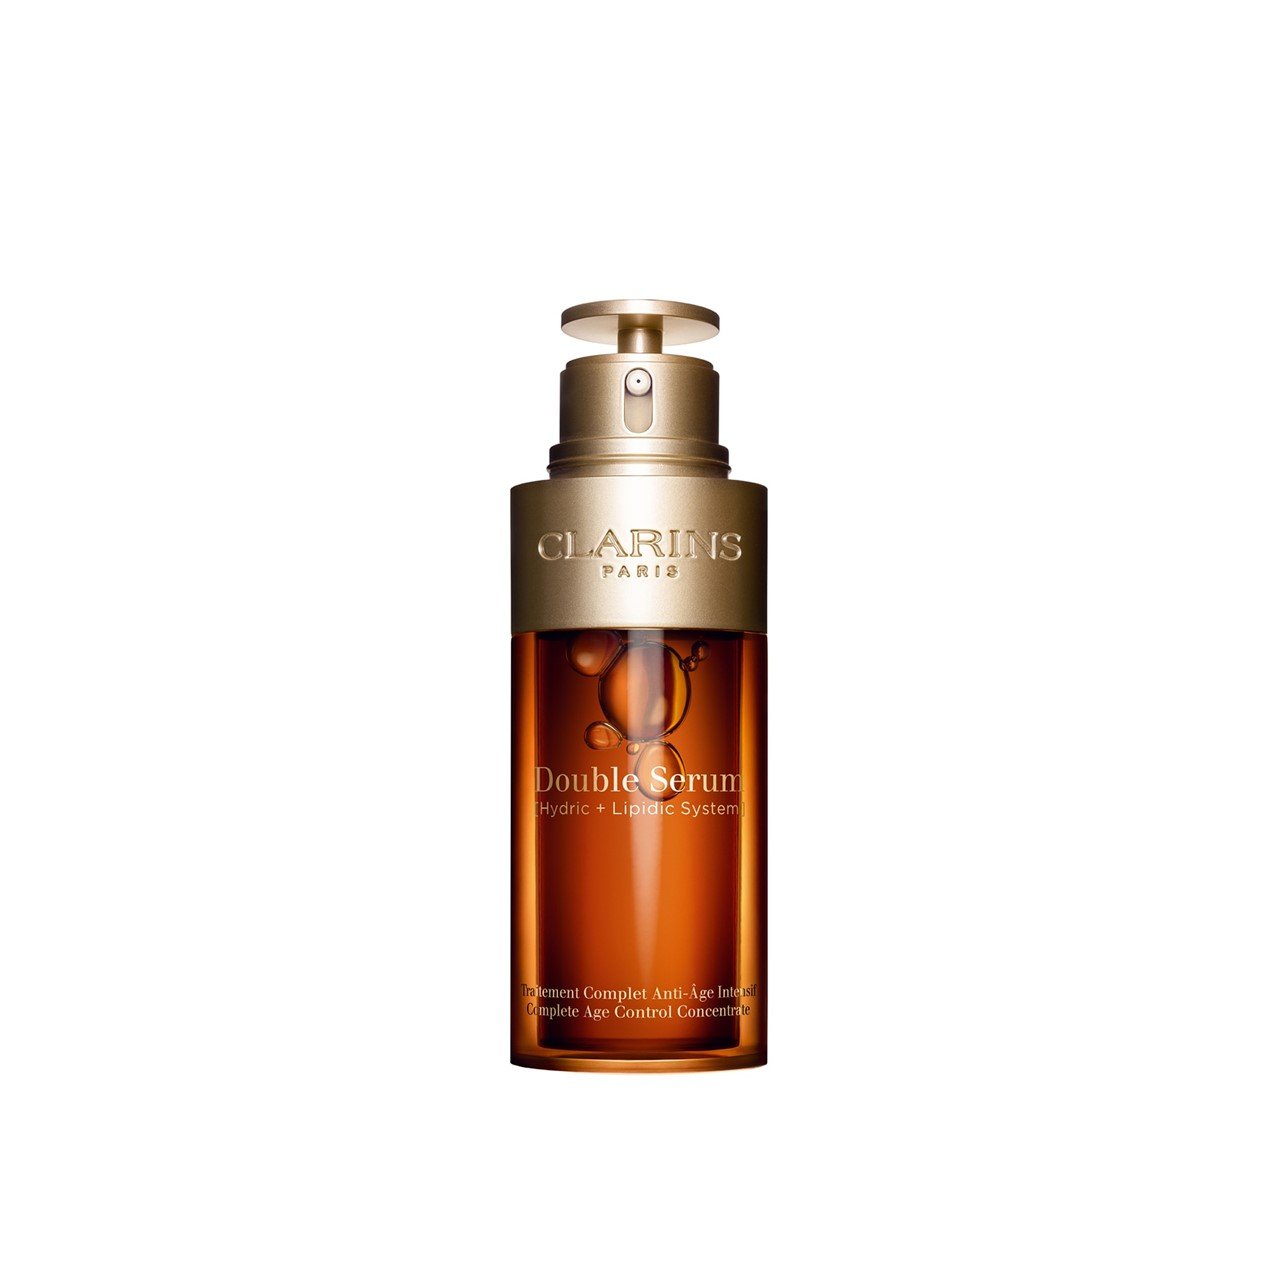 Clarins Double Serum Complete Age Control Concentrate 75ml (2.54fl oz)